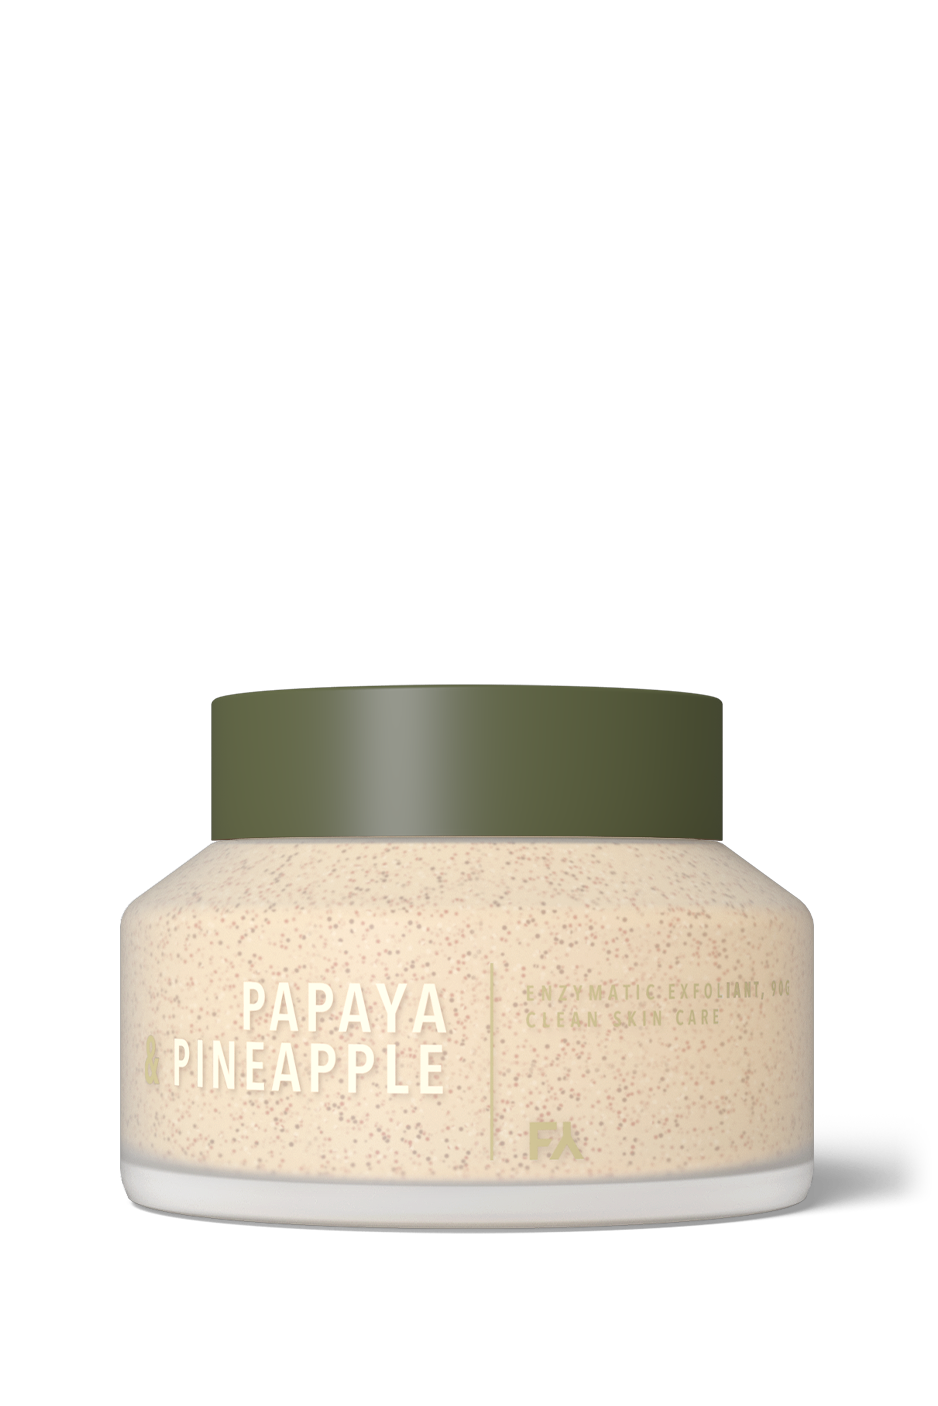 Product picture of the papaya & pineapple enzymatic exfoliant by Fields of Yarrow on a transparent background